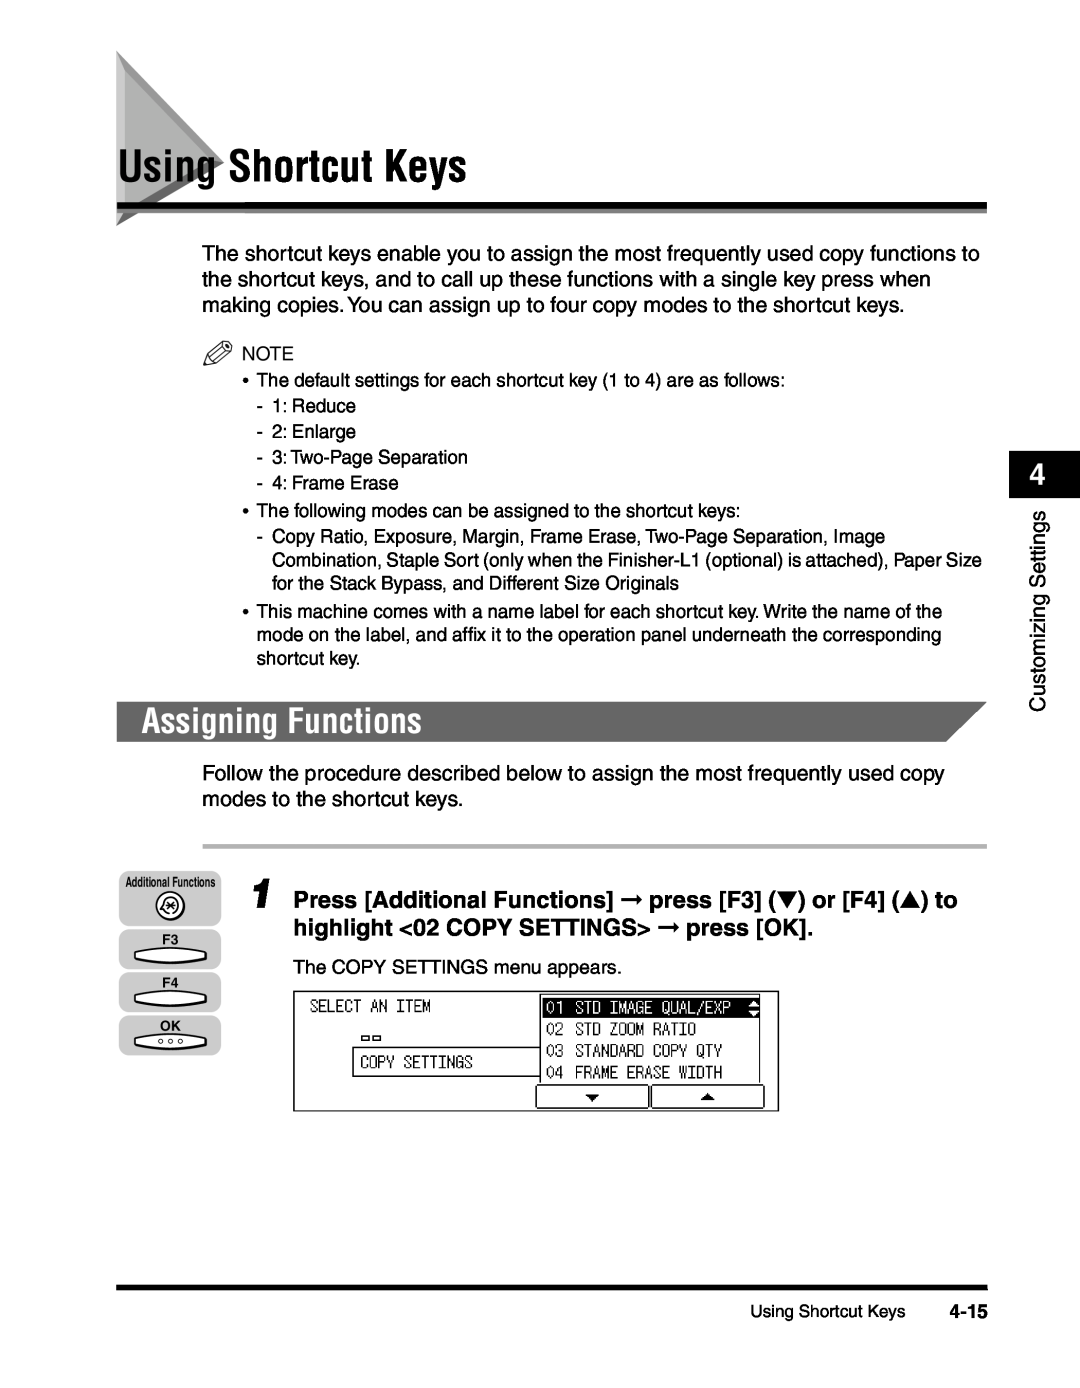 Canon 2010F manual Using Shortcut Keys, Assigning Functions 